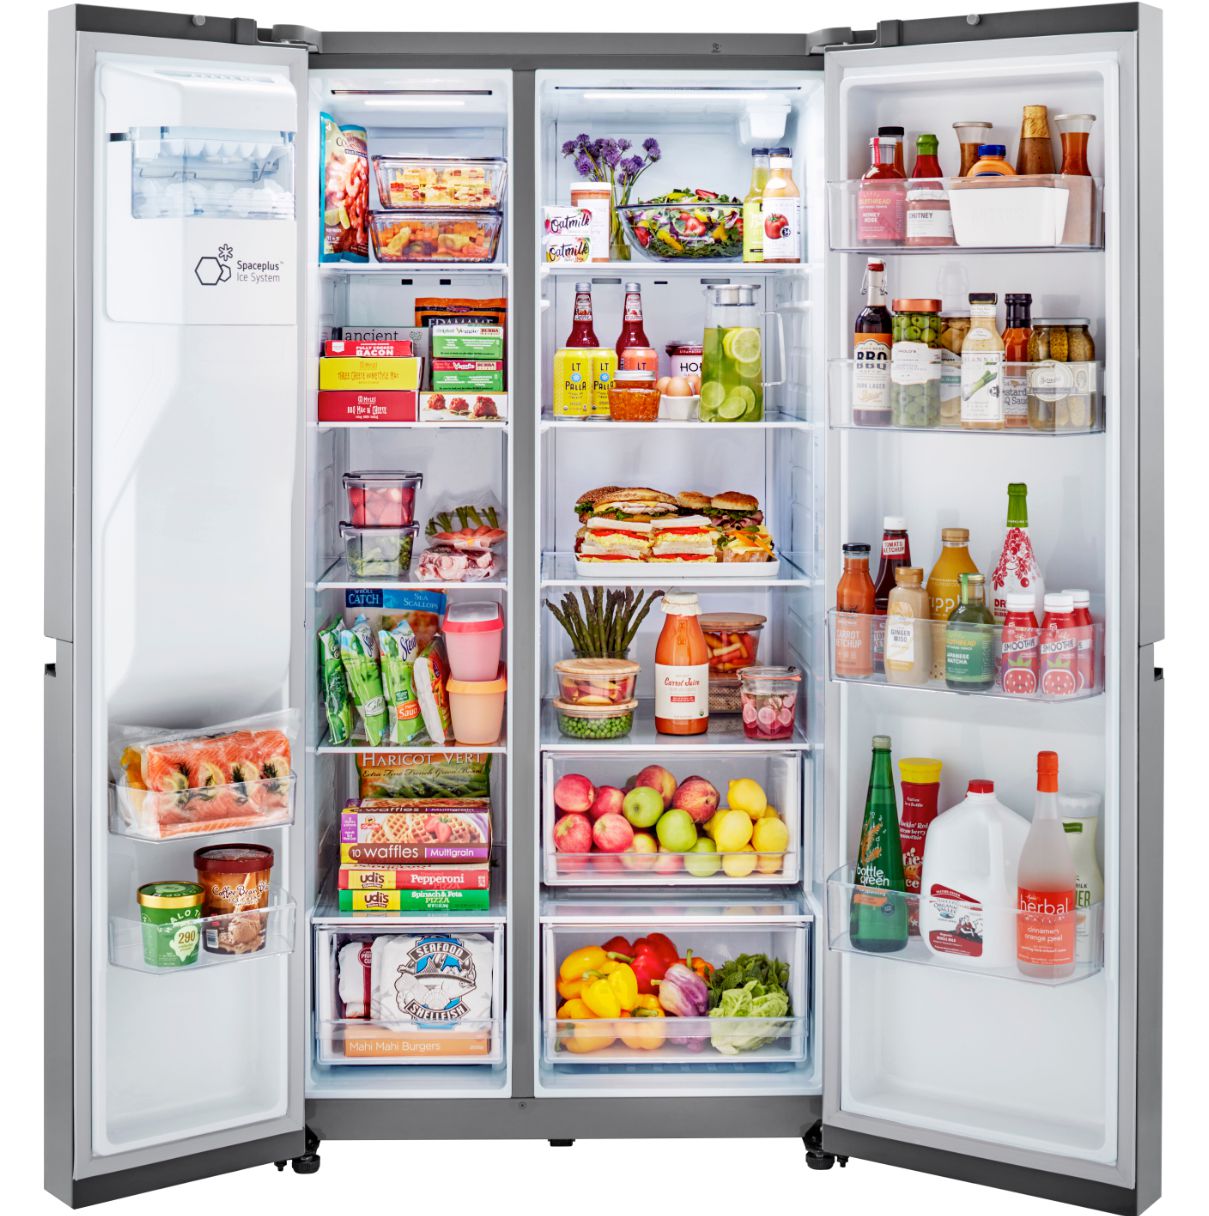 LG 36 Inch Side-by-Side Refrigerator in Stainless Steel 27 Cu. Ft. (LRSXS2706S)